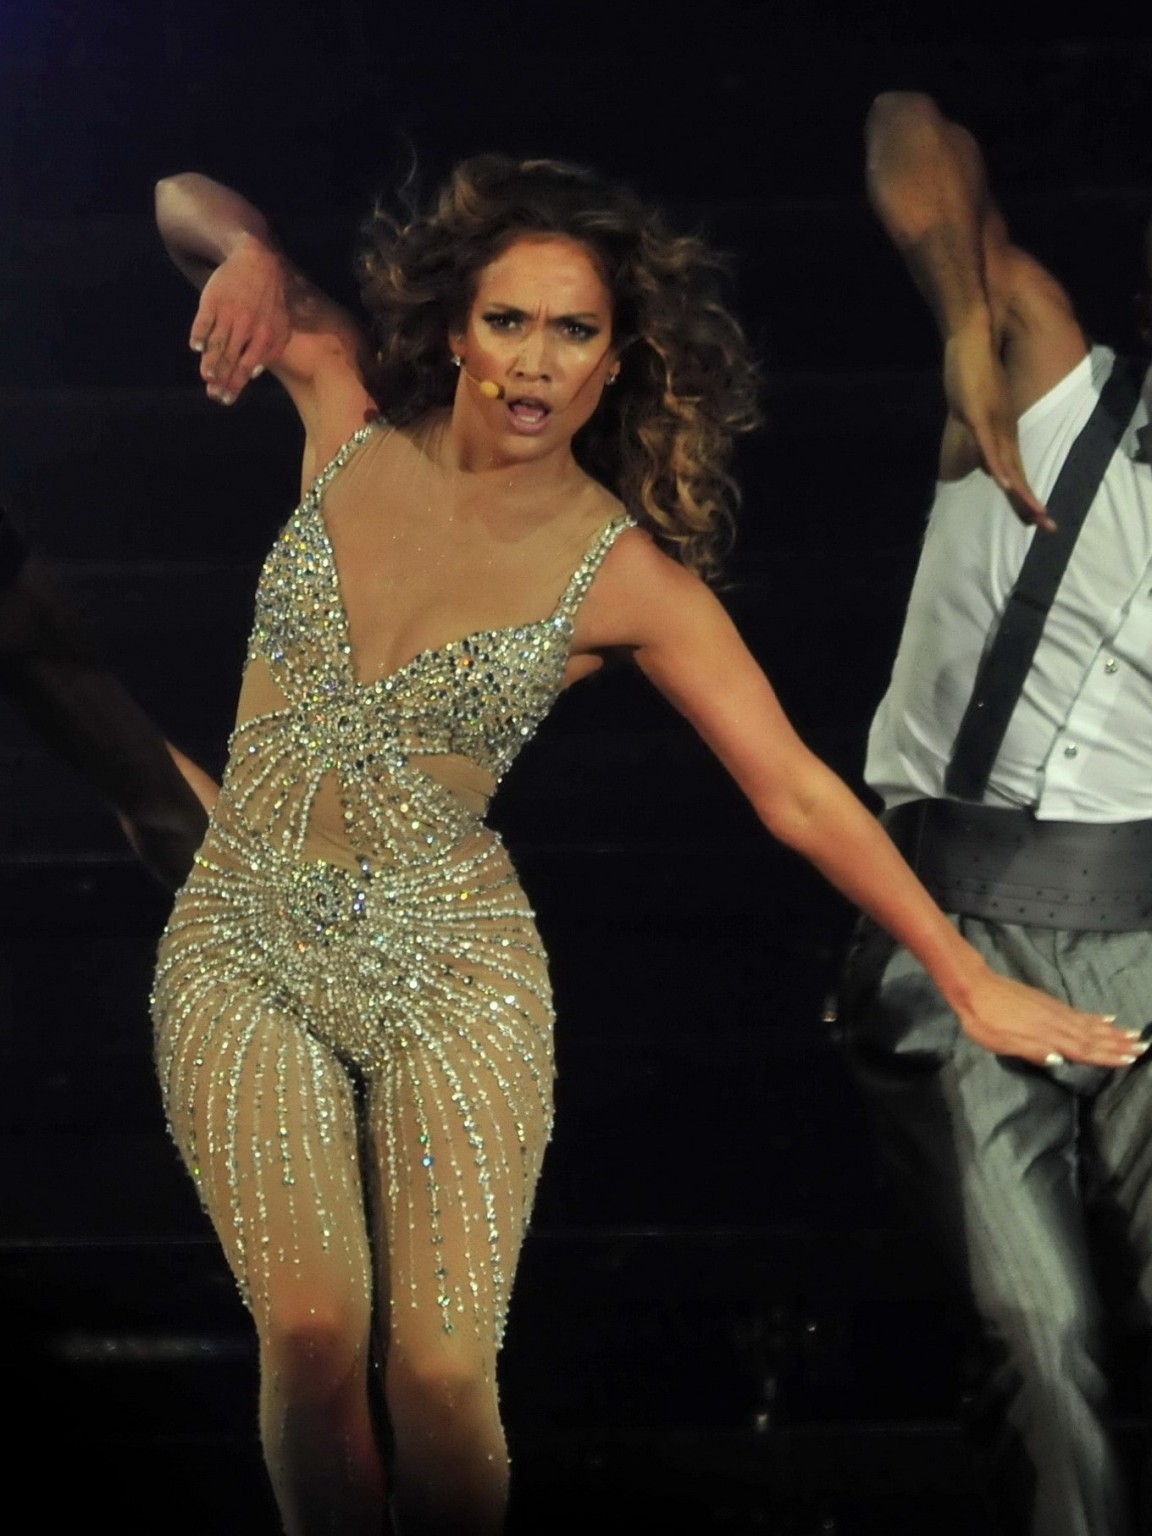 Jennifer Lopez showing off her booty in tight see-through outfit on stage in Pan #75259810